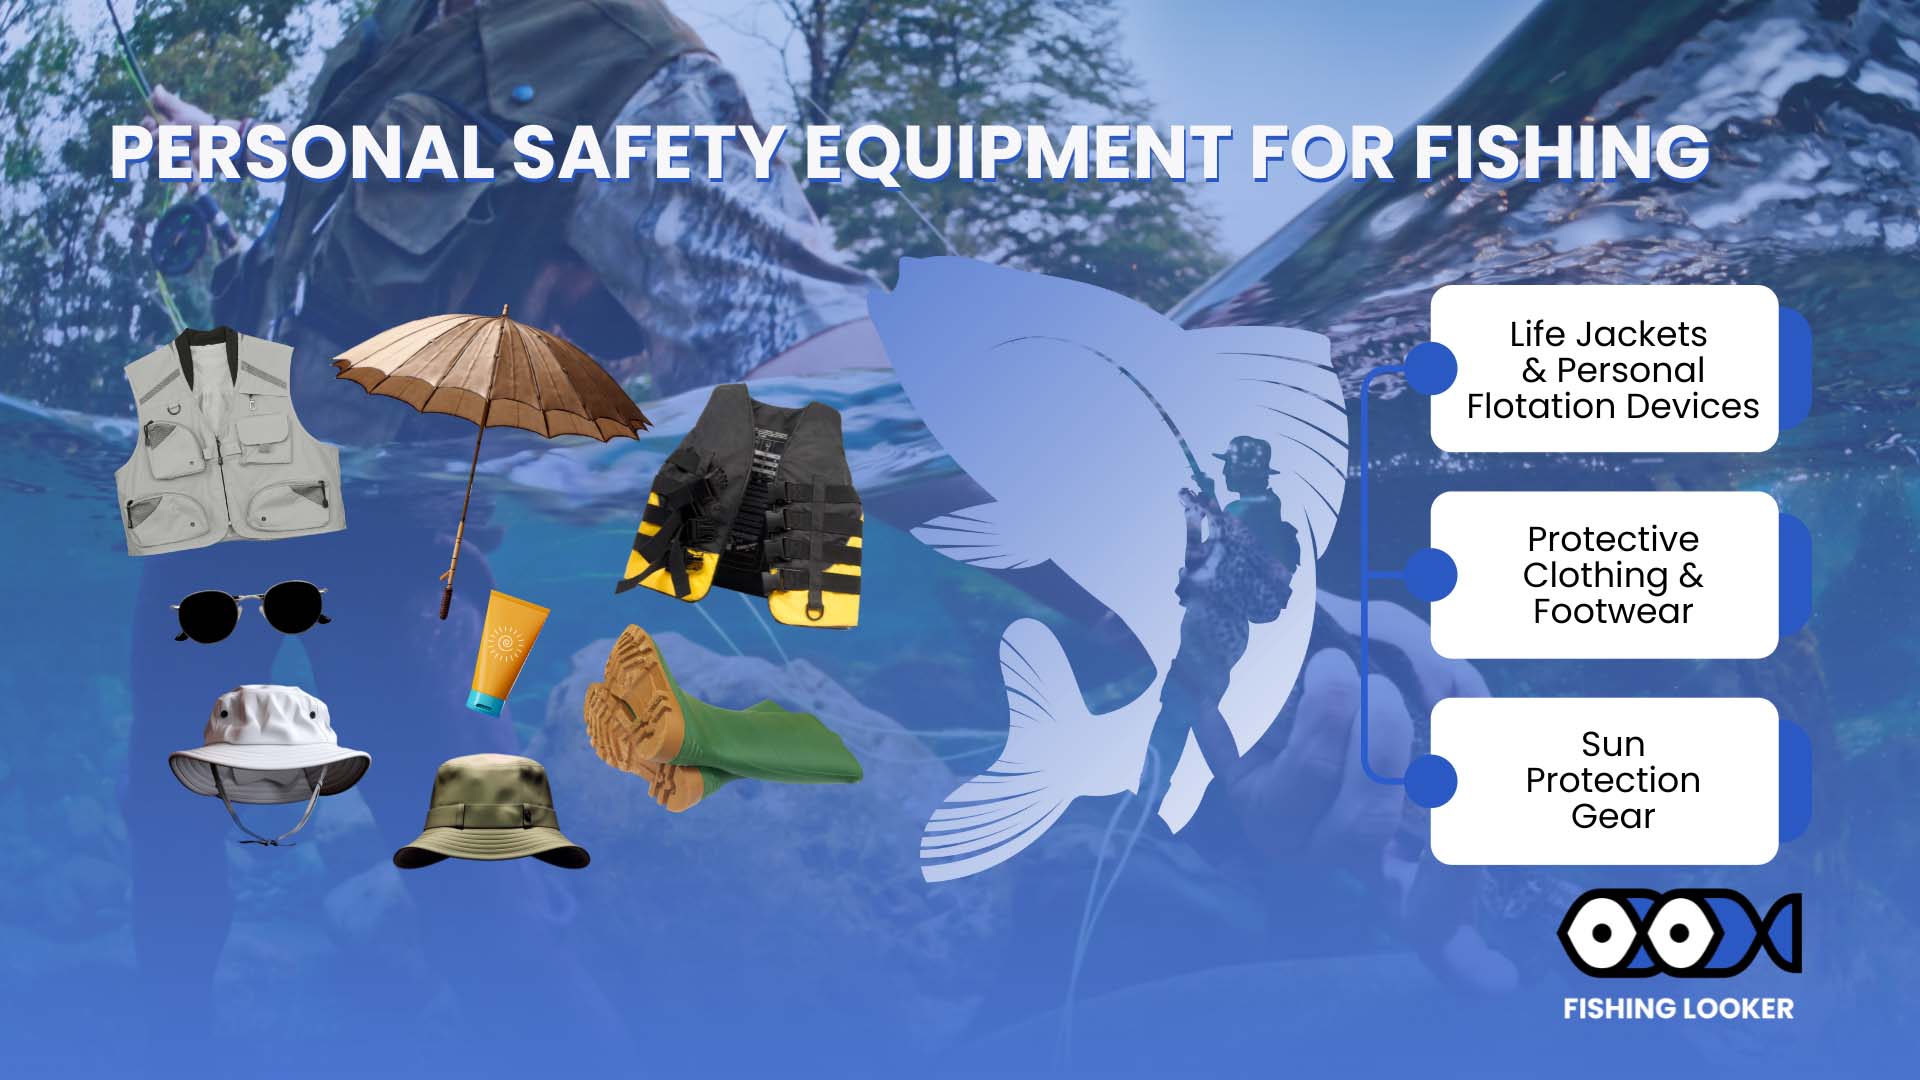 Personal Safety Equipment for Fishing